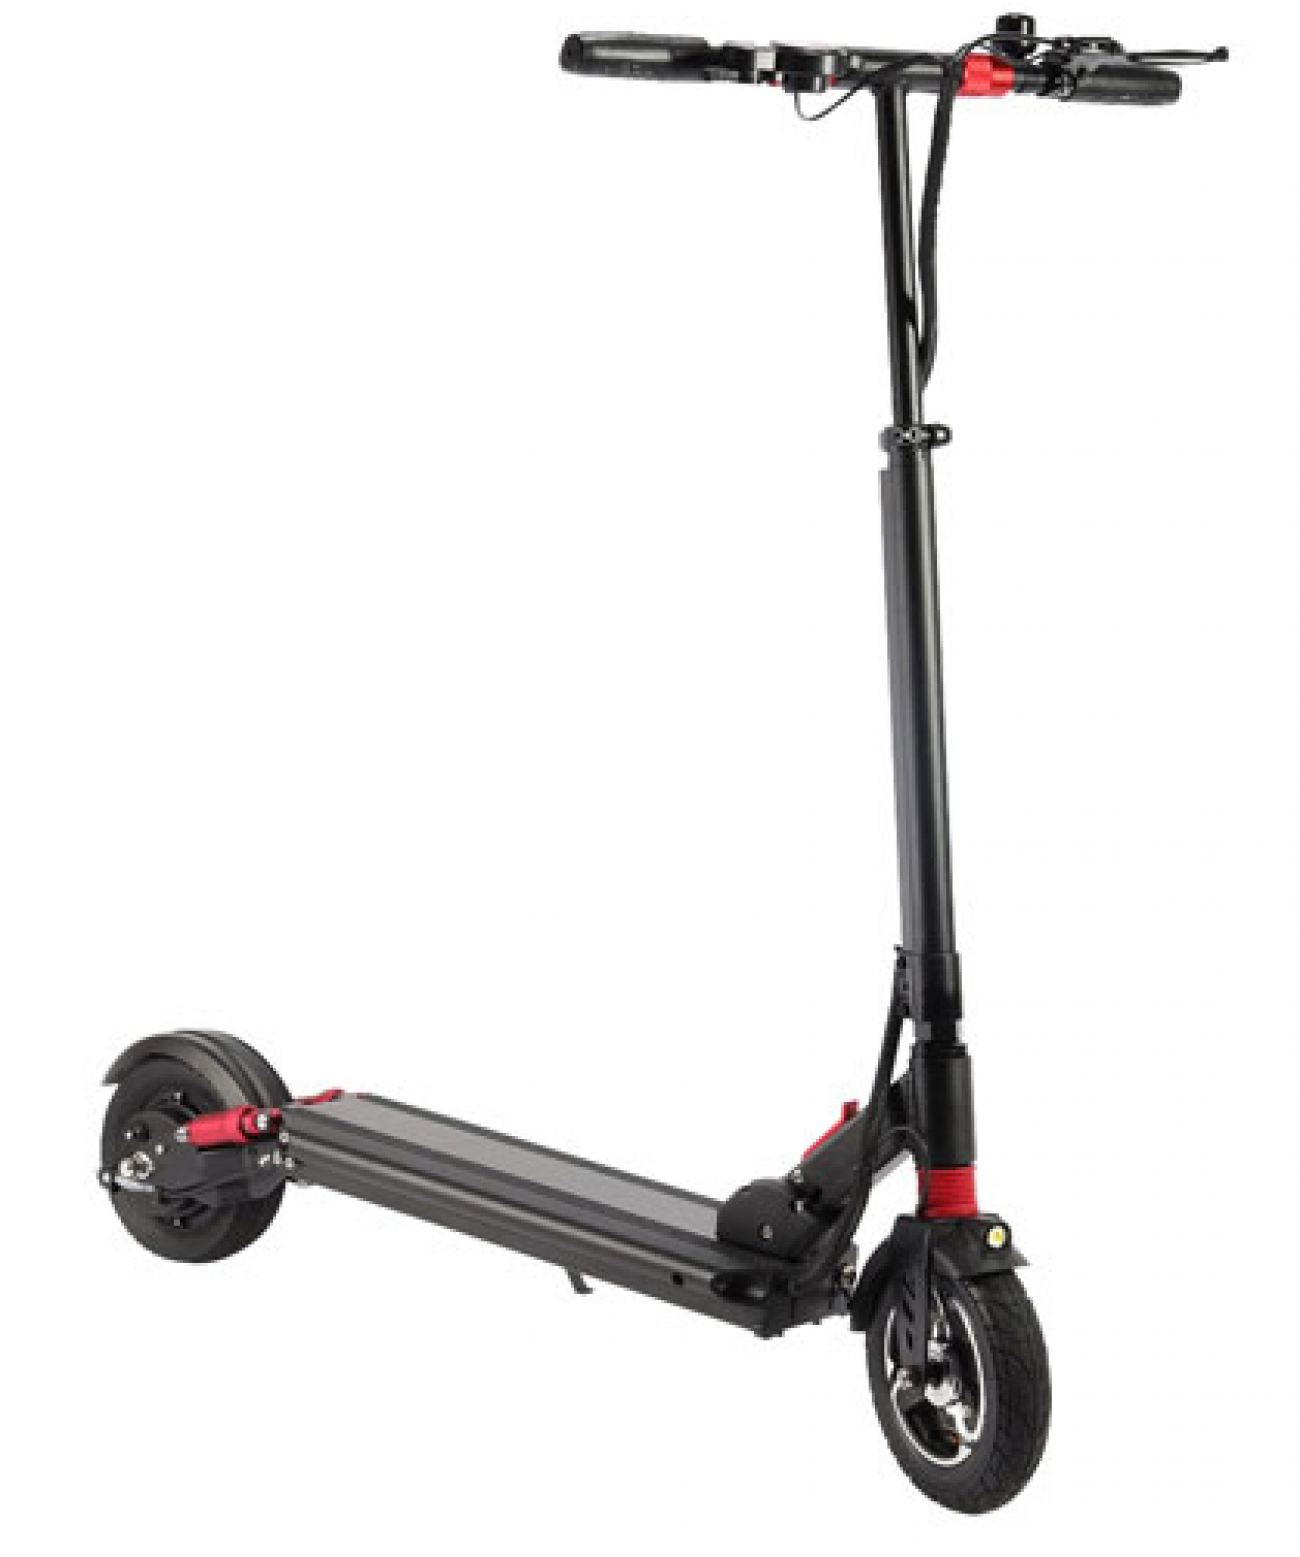 Plug City S801 Electric Scooter  